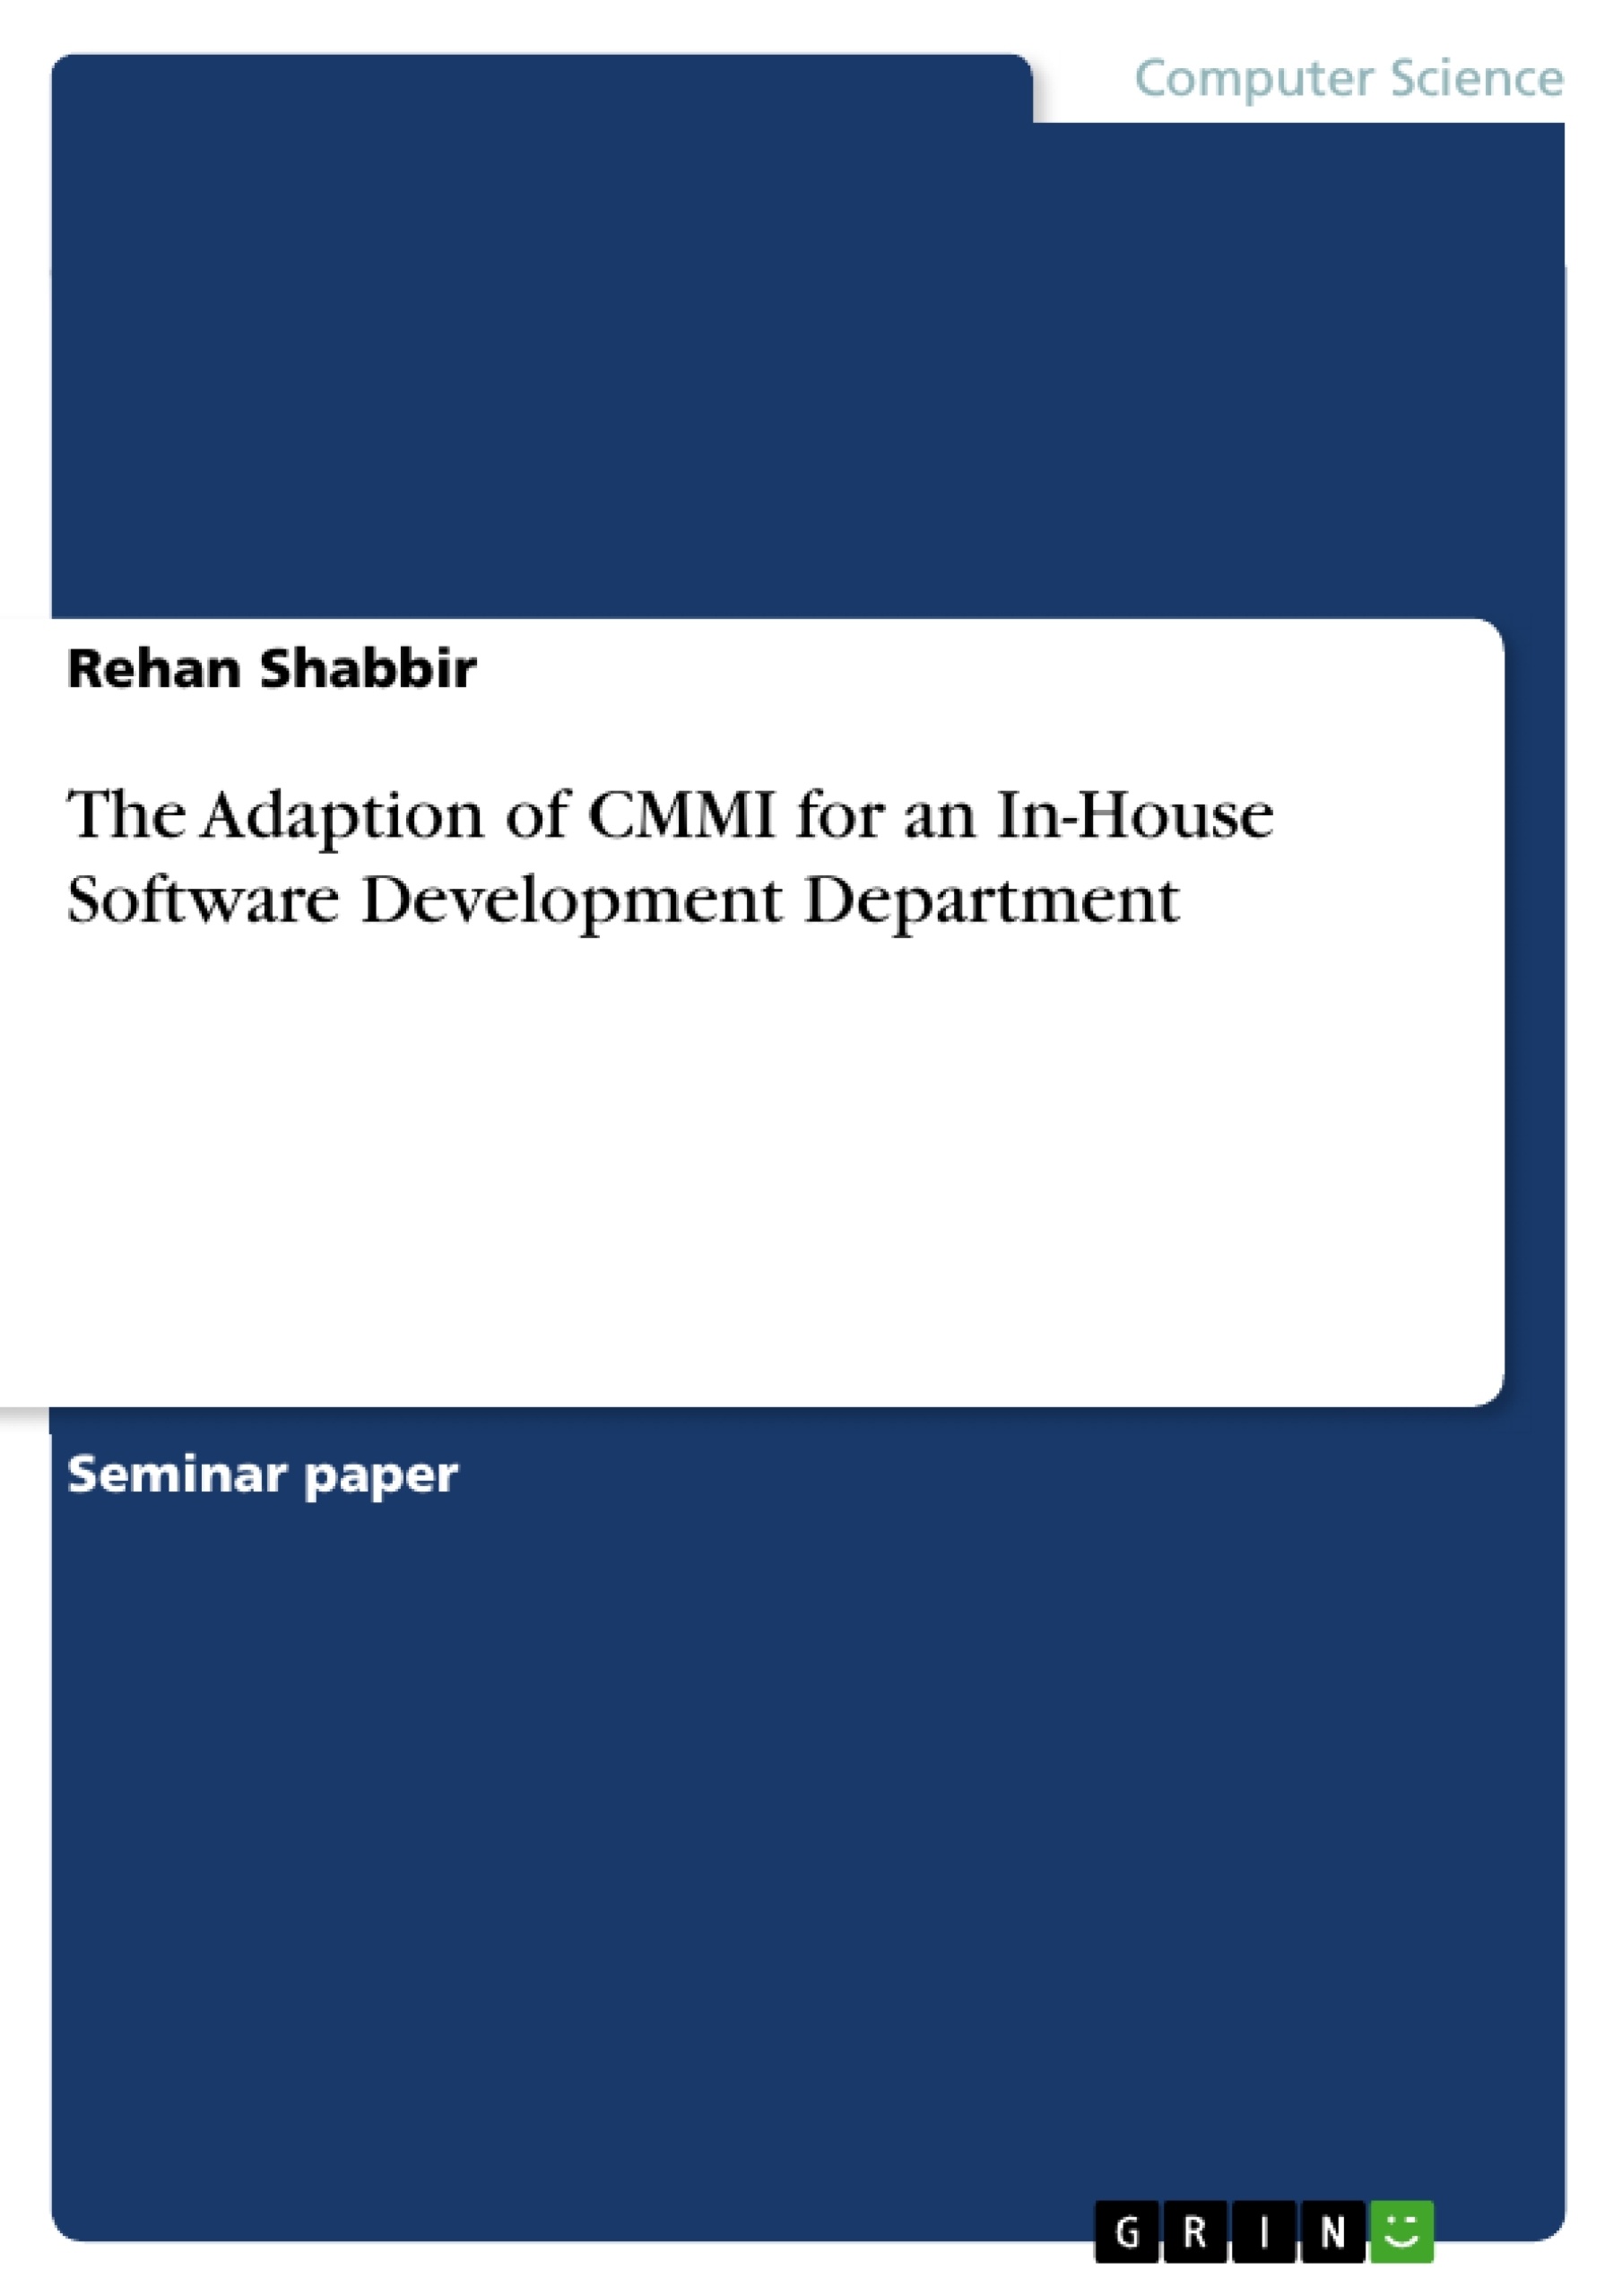 Título: The Adaption of CMMI for an In-House Software Development Department